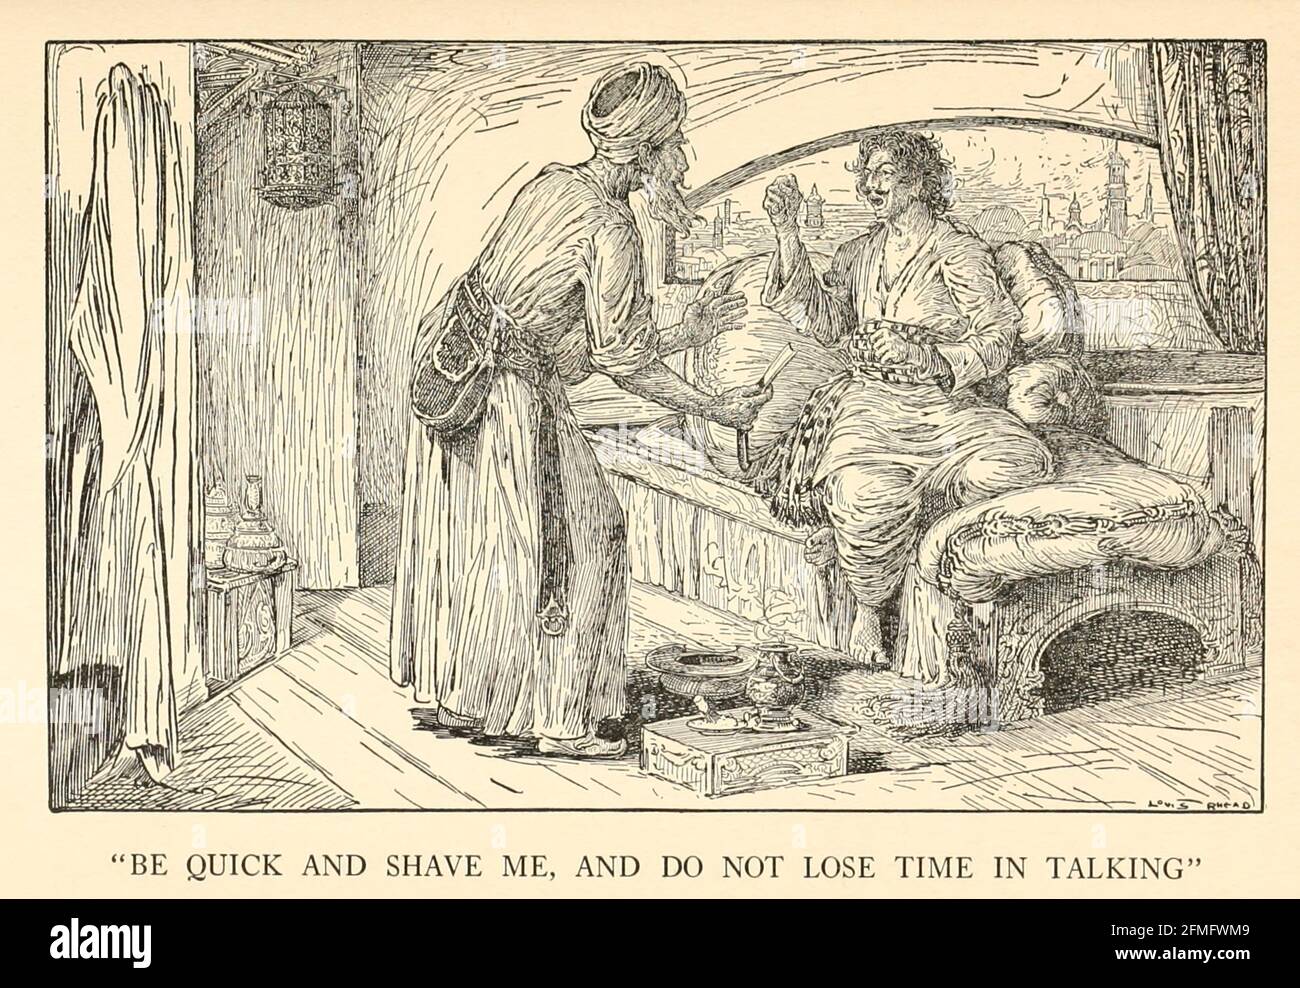 Be Quick And Shave Me, And Do Not Lose Time In Talking from the book '  The Arabian nights' entertainments ' Test and Illustrations by Louis Rhead, Published  in New York by Harper & Brothers in 1916. In order to save her life, Sheherazade entertains the sultan by telling him wondrous stories Stock Photo